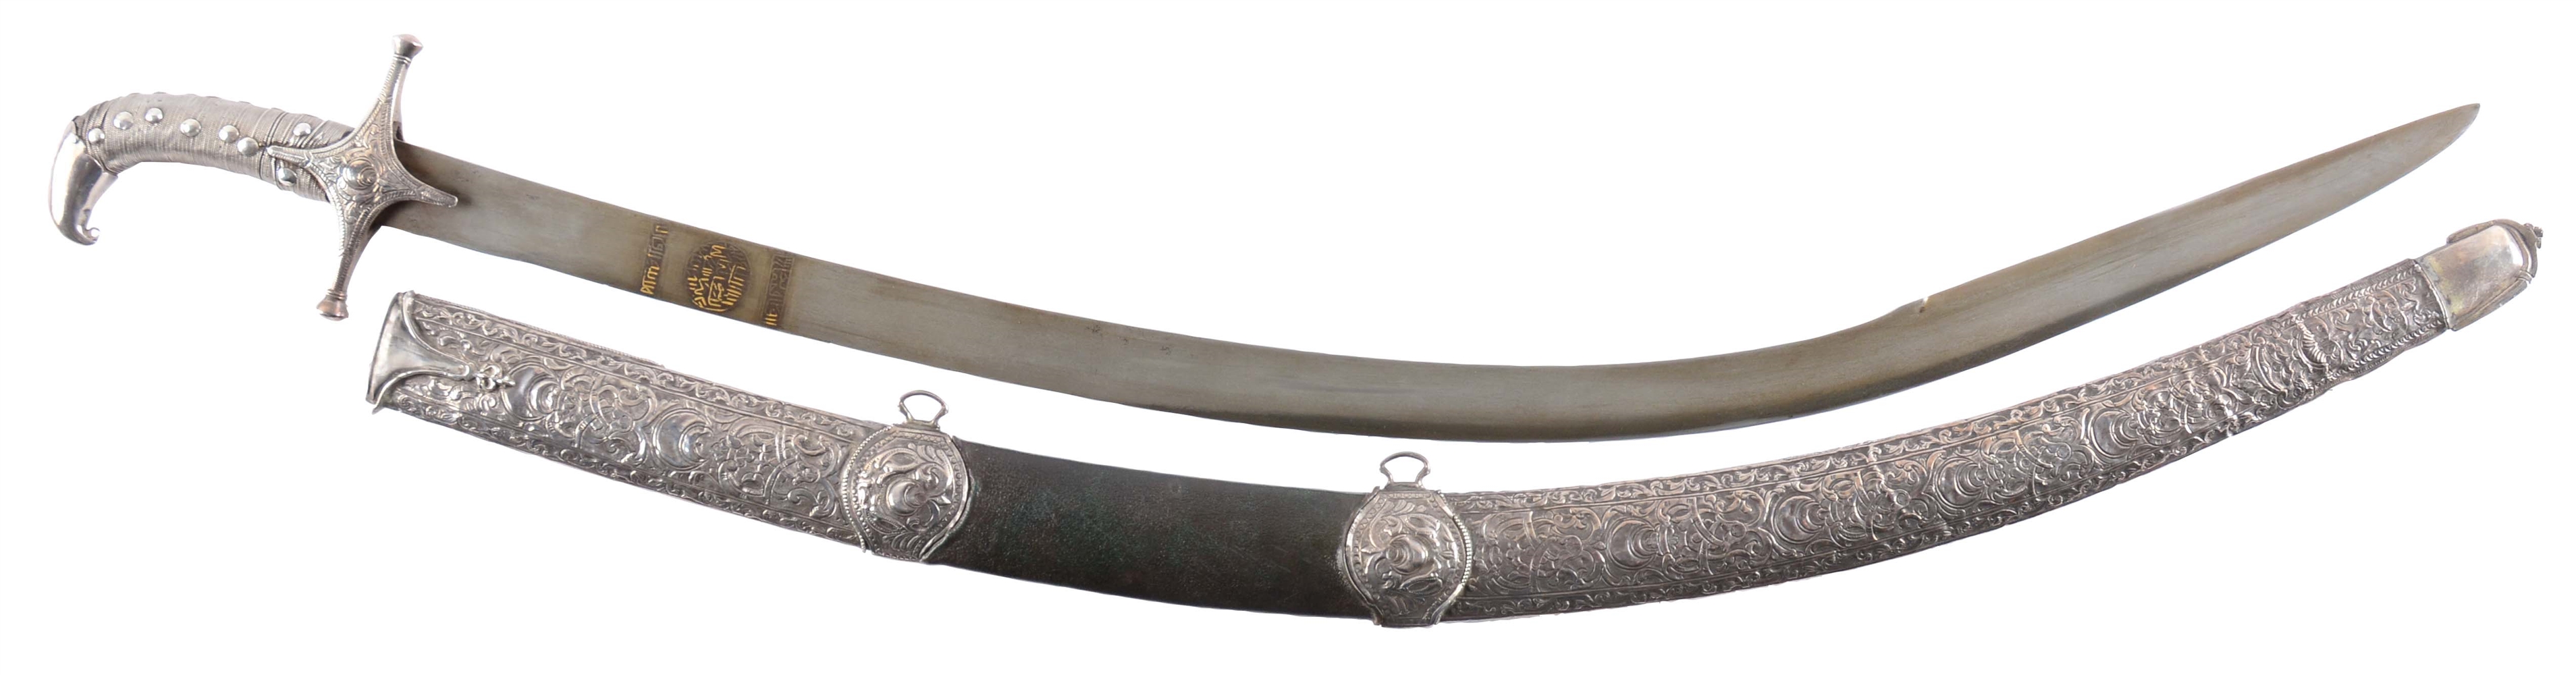 FINE FULL SILVER MOUNTED 17TH/18TH CENTURY OTTOMAN KILIJ WITH LONG GOLD SIGNED WATERED WOOTZ BLADE & SCABBARD WITH EXTENSIVELY HAND WORKED SILVER FITTINGS.